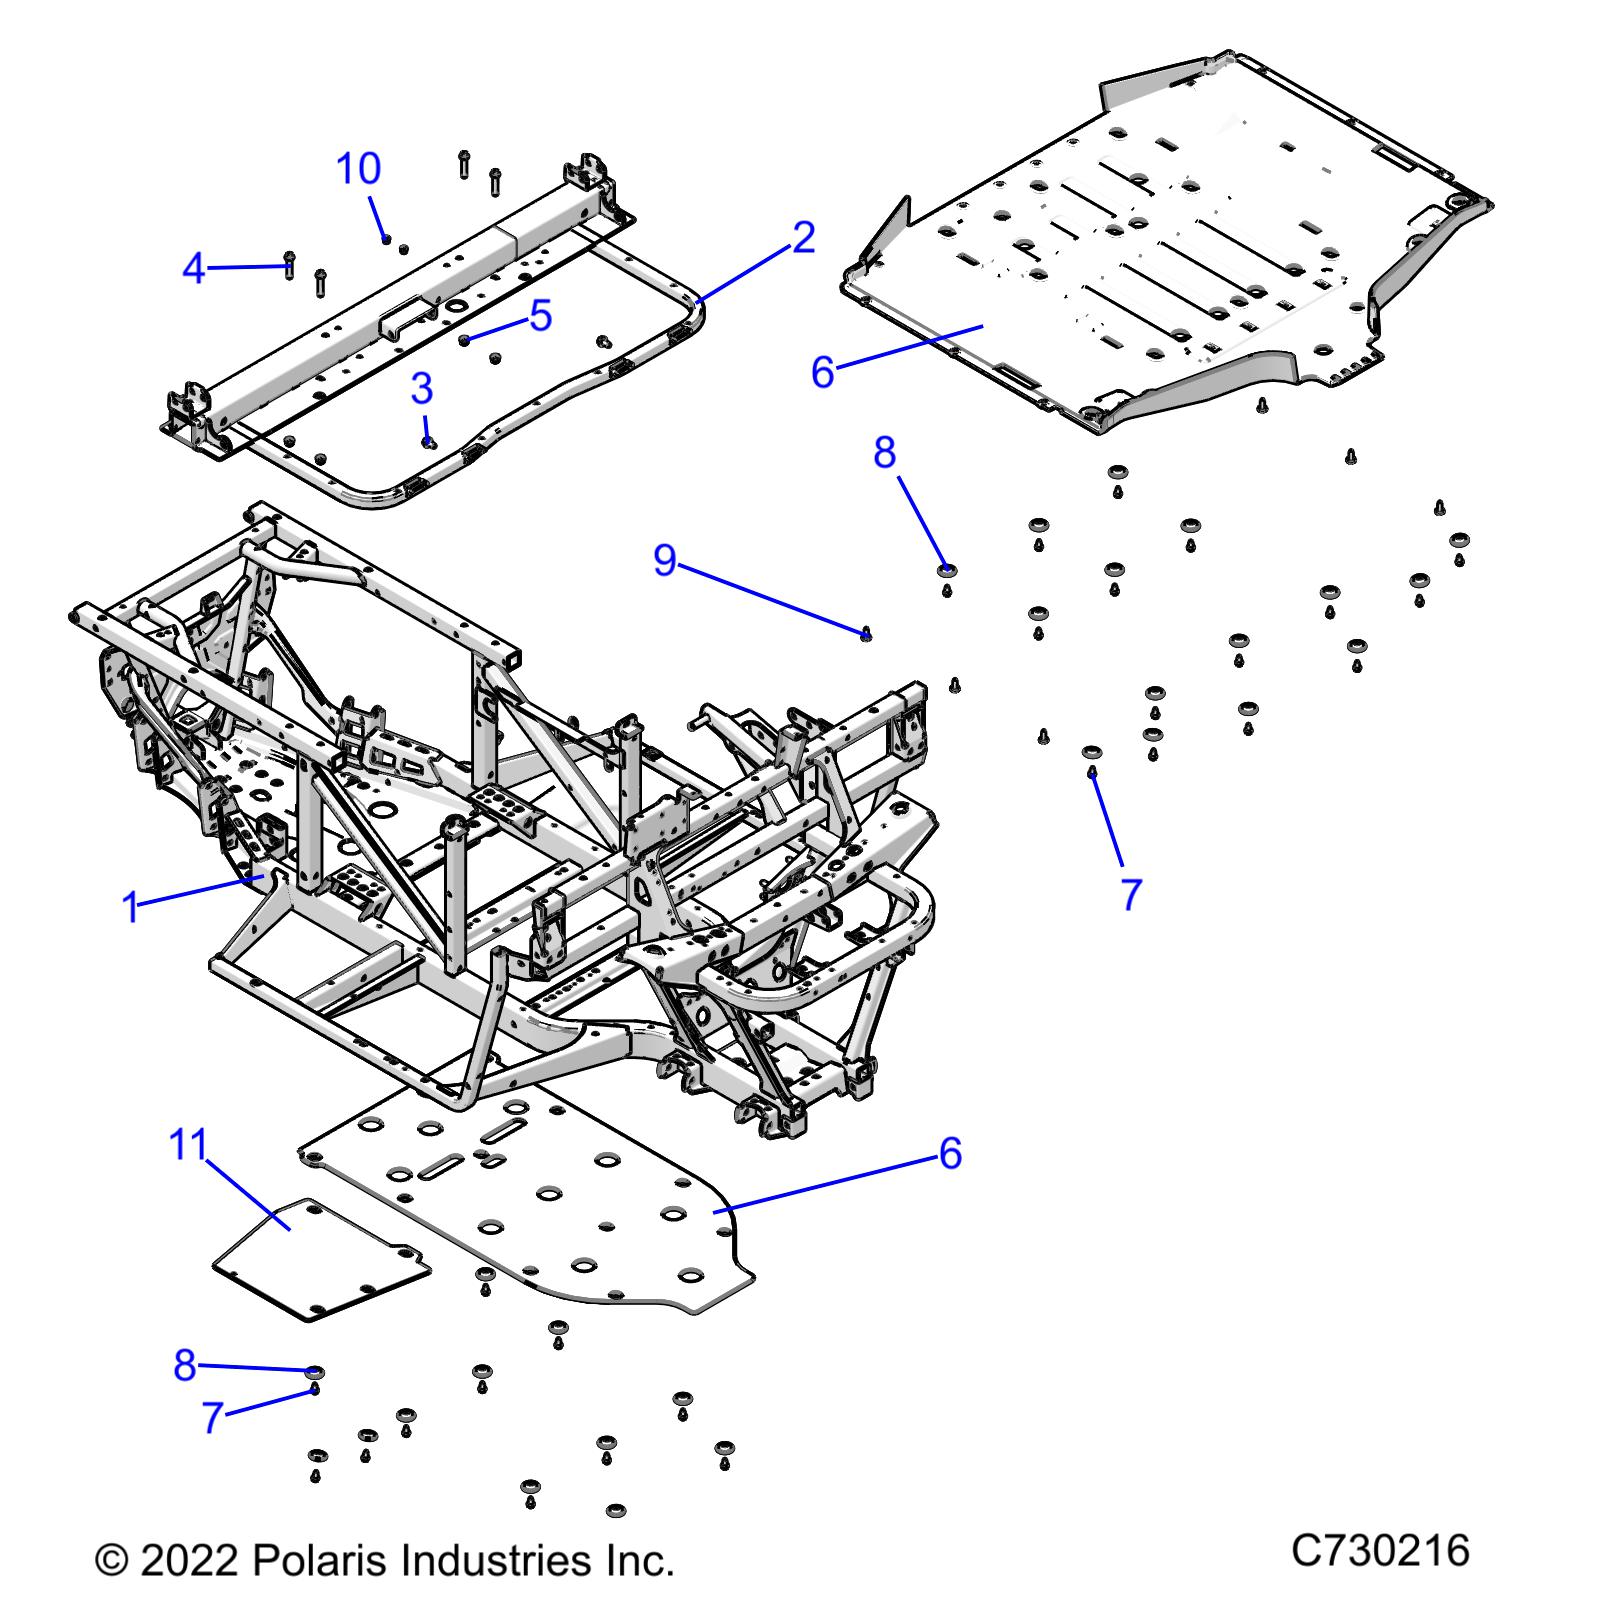 Part Number : 5450136 SKID PLATE